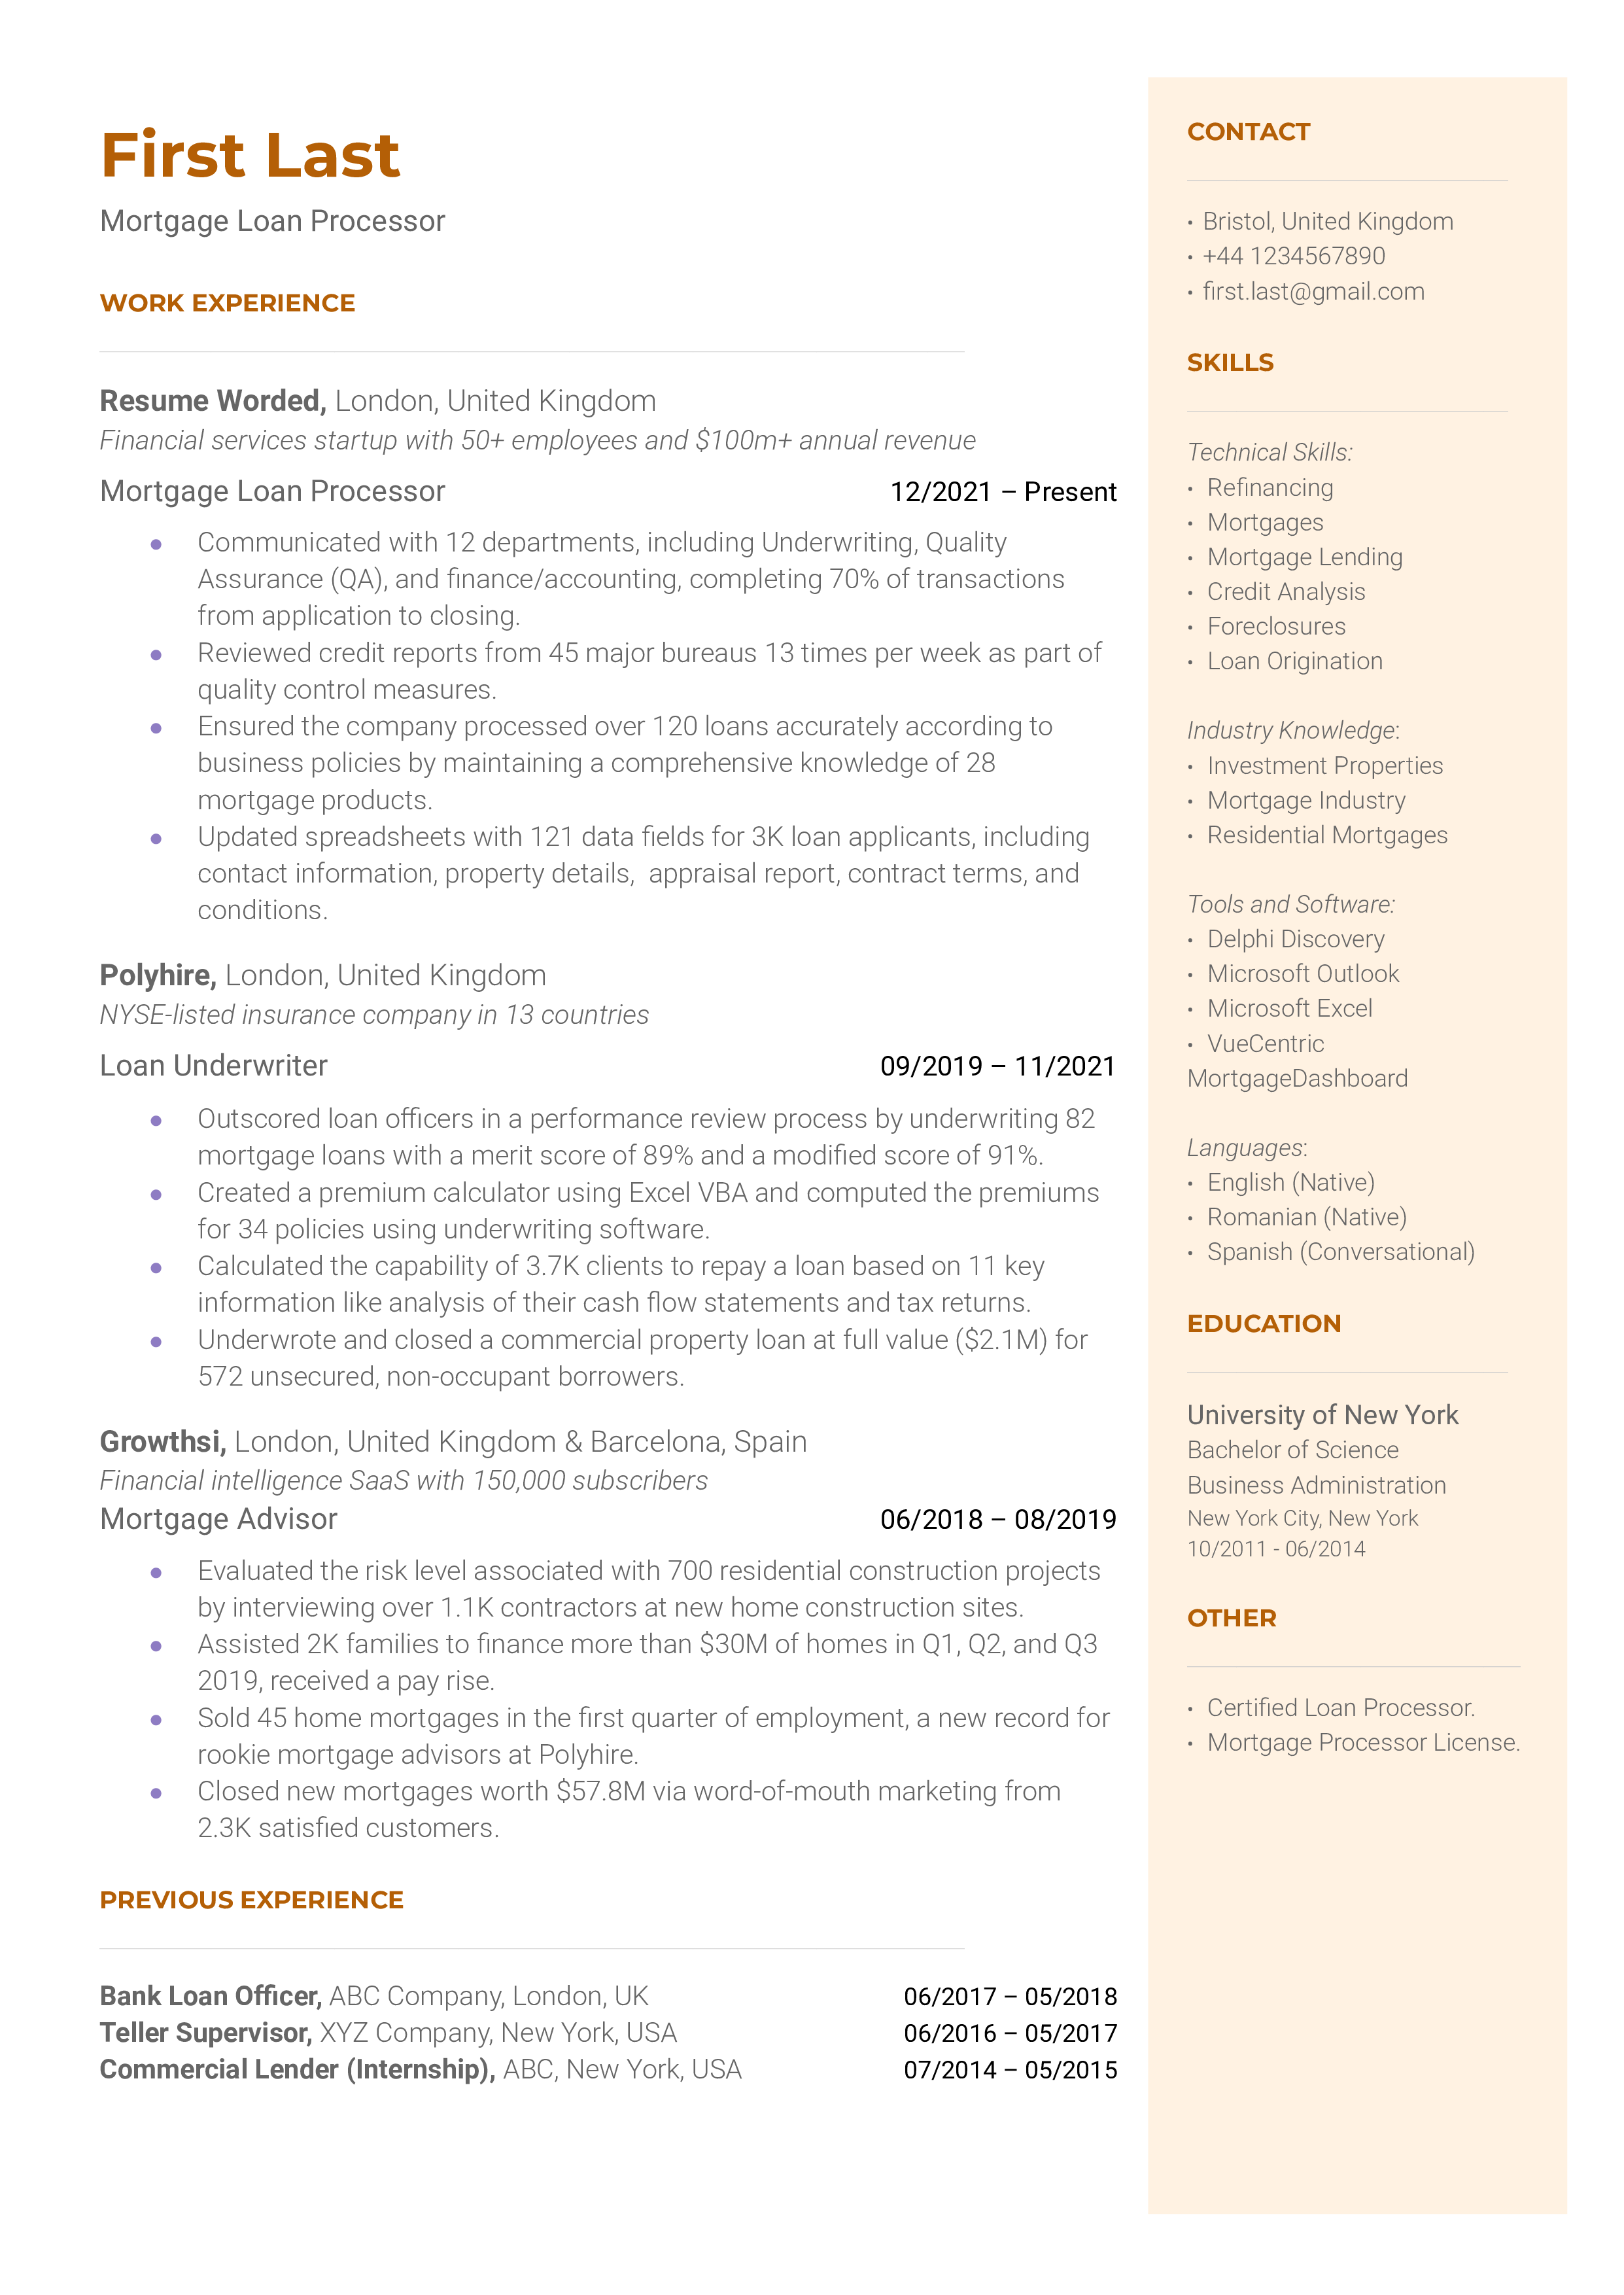 CV sample showcasing the skills and experience for a Mortgage Loan Processor job.